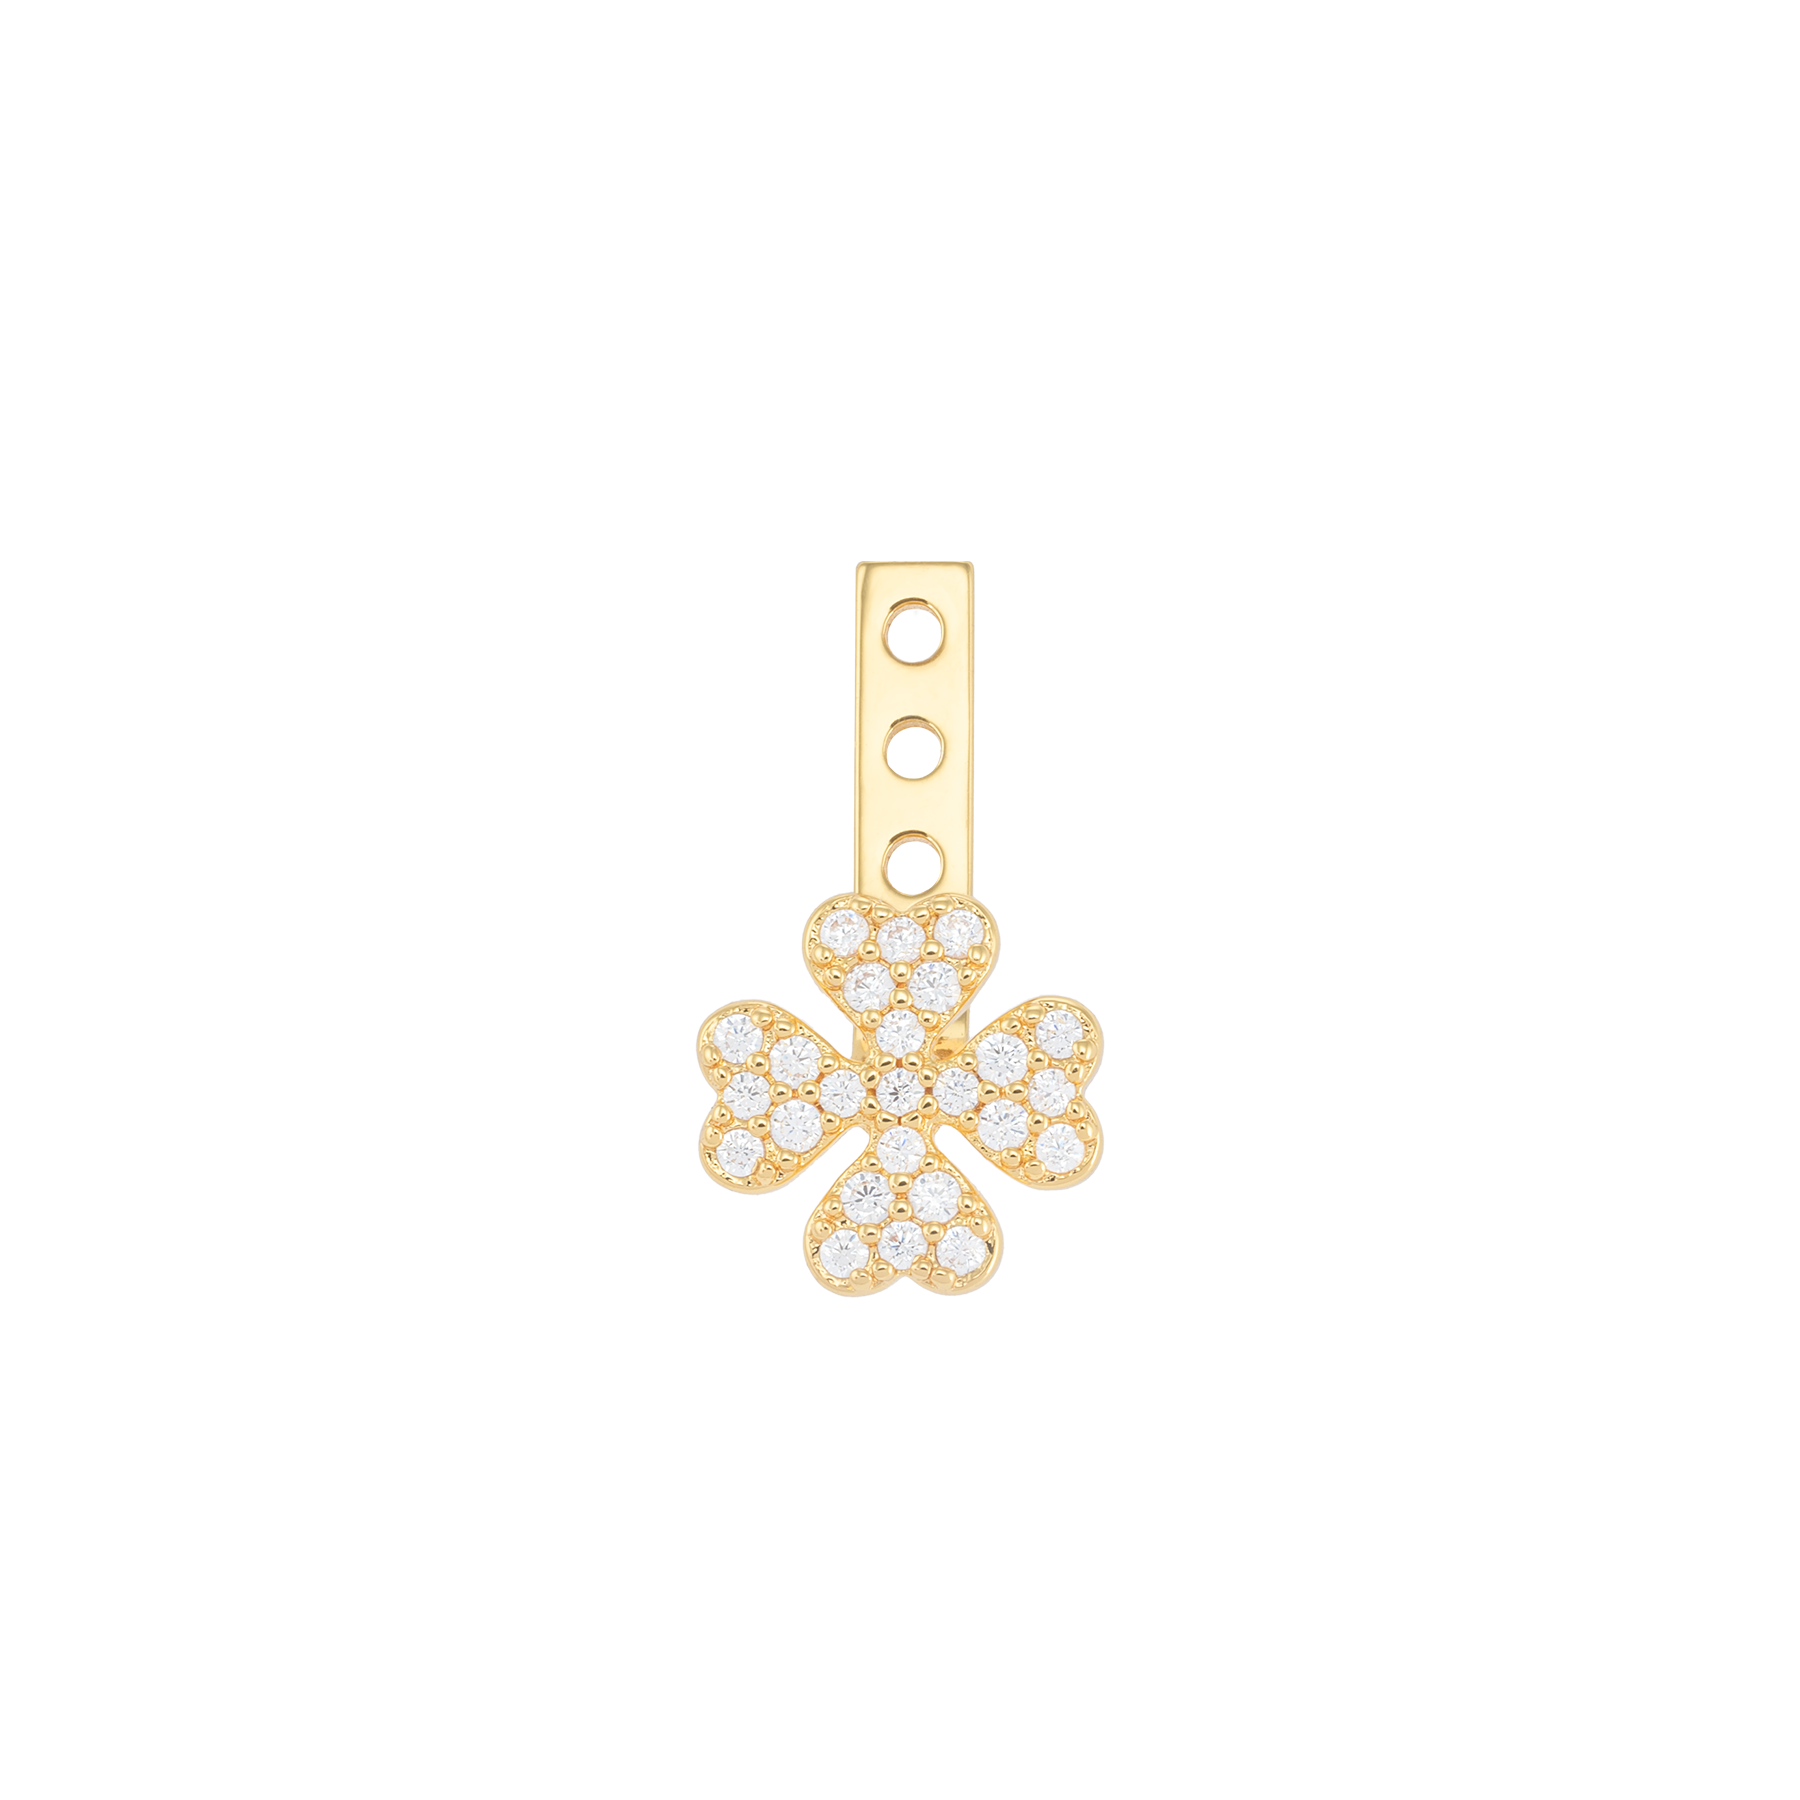 Image of Stud charm no. 20 from Emilia by Bon Dep